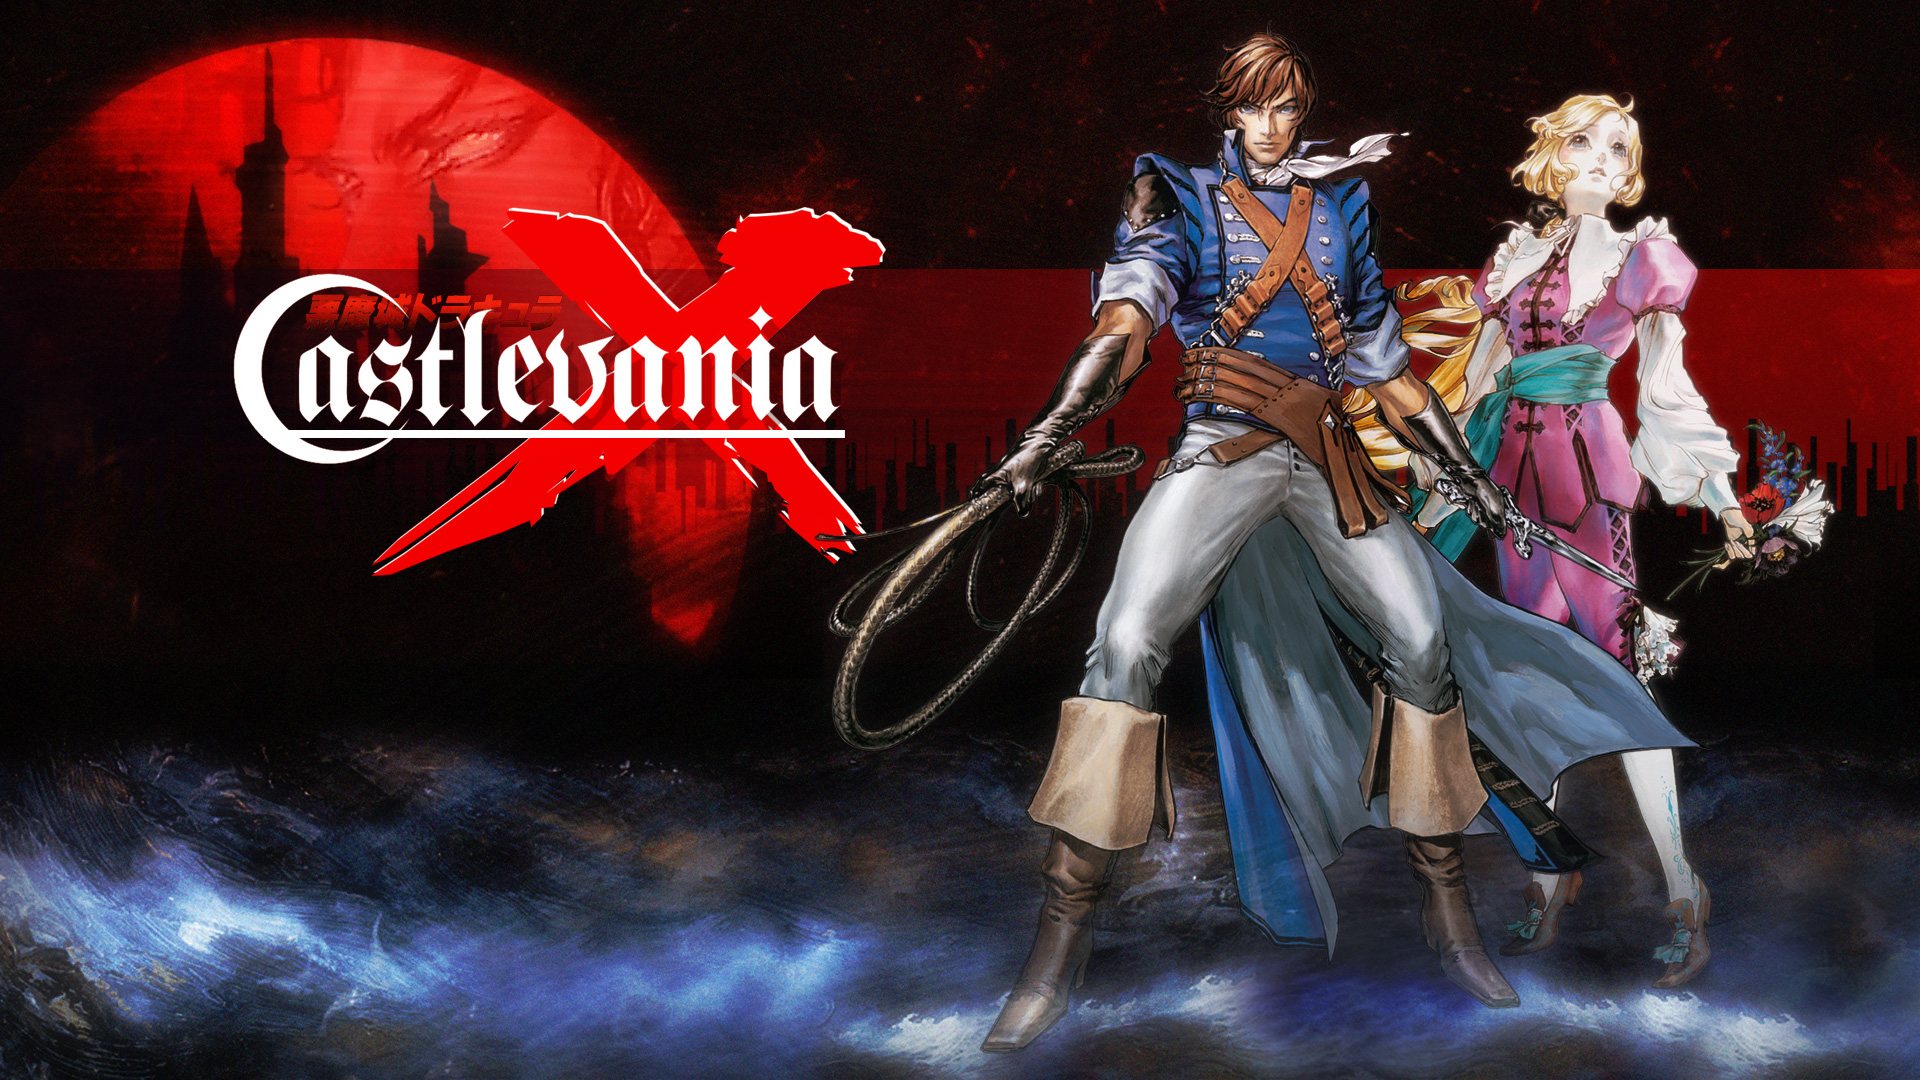 Castlevania: Dracula X HD Wallpapers and Backgrounds